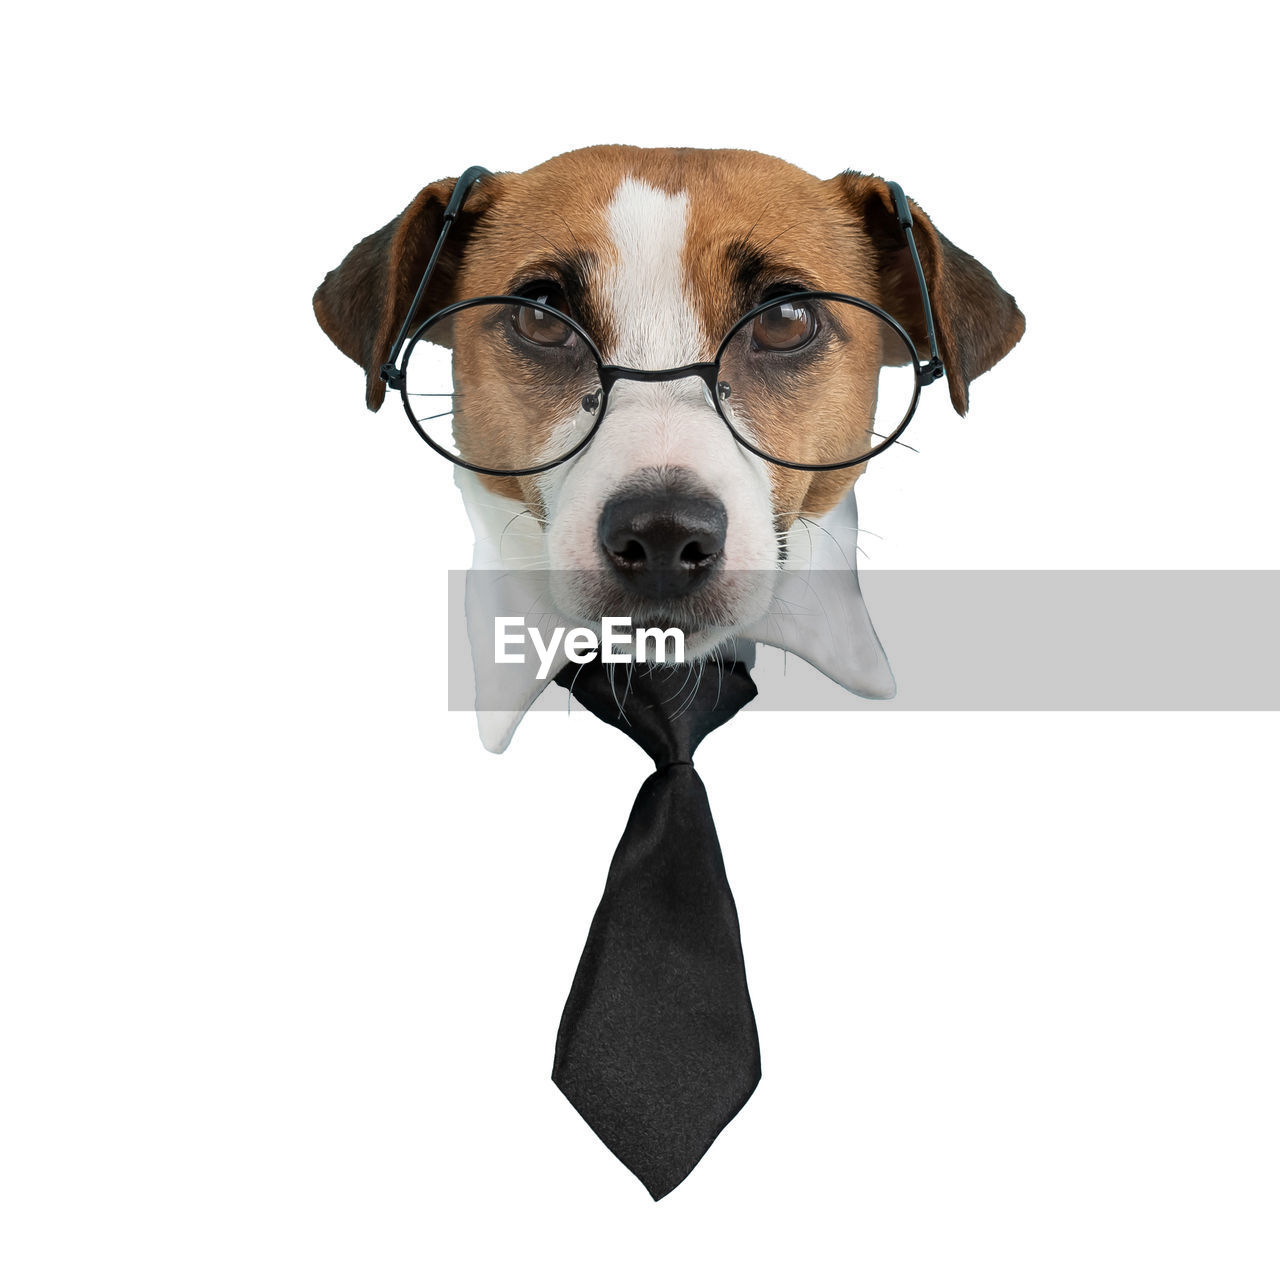 one animal, canine, dog, animal themes, animal, pet, mammal, domestic animals, portrait, carnivore, cut out, tie, glasses, humor, fun, eyeglasses, white background, looking at camera, indoors, animal body part, bow tie, studio shot, cute, menswear, copy space, necktie, no people, moustache, collar, hound